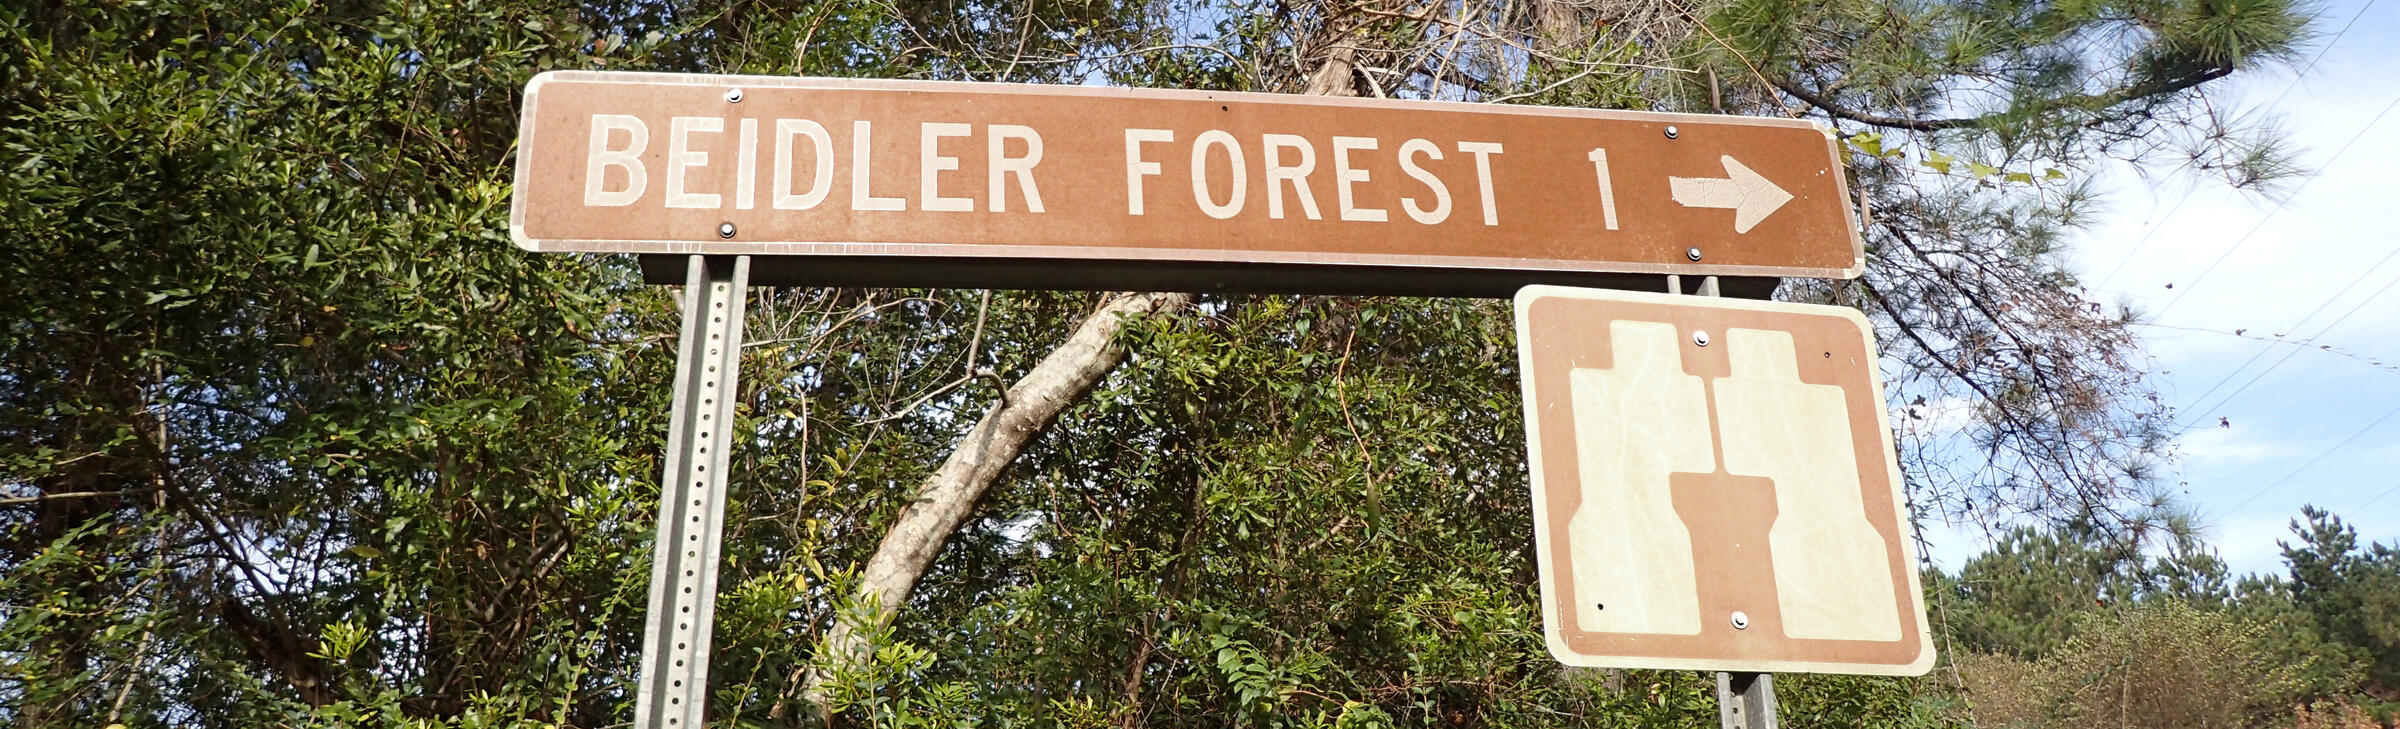 A road sign pointing to Beidler Forest. It's a little weathered but still useful.